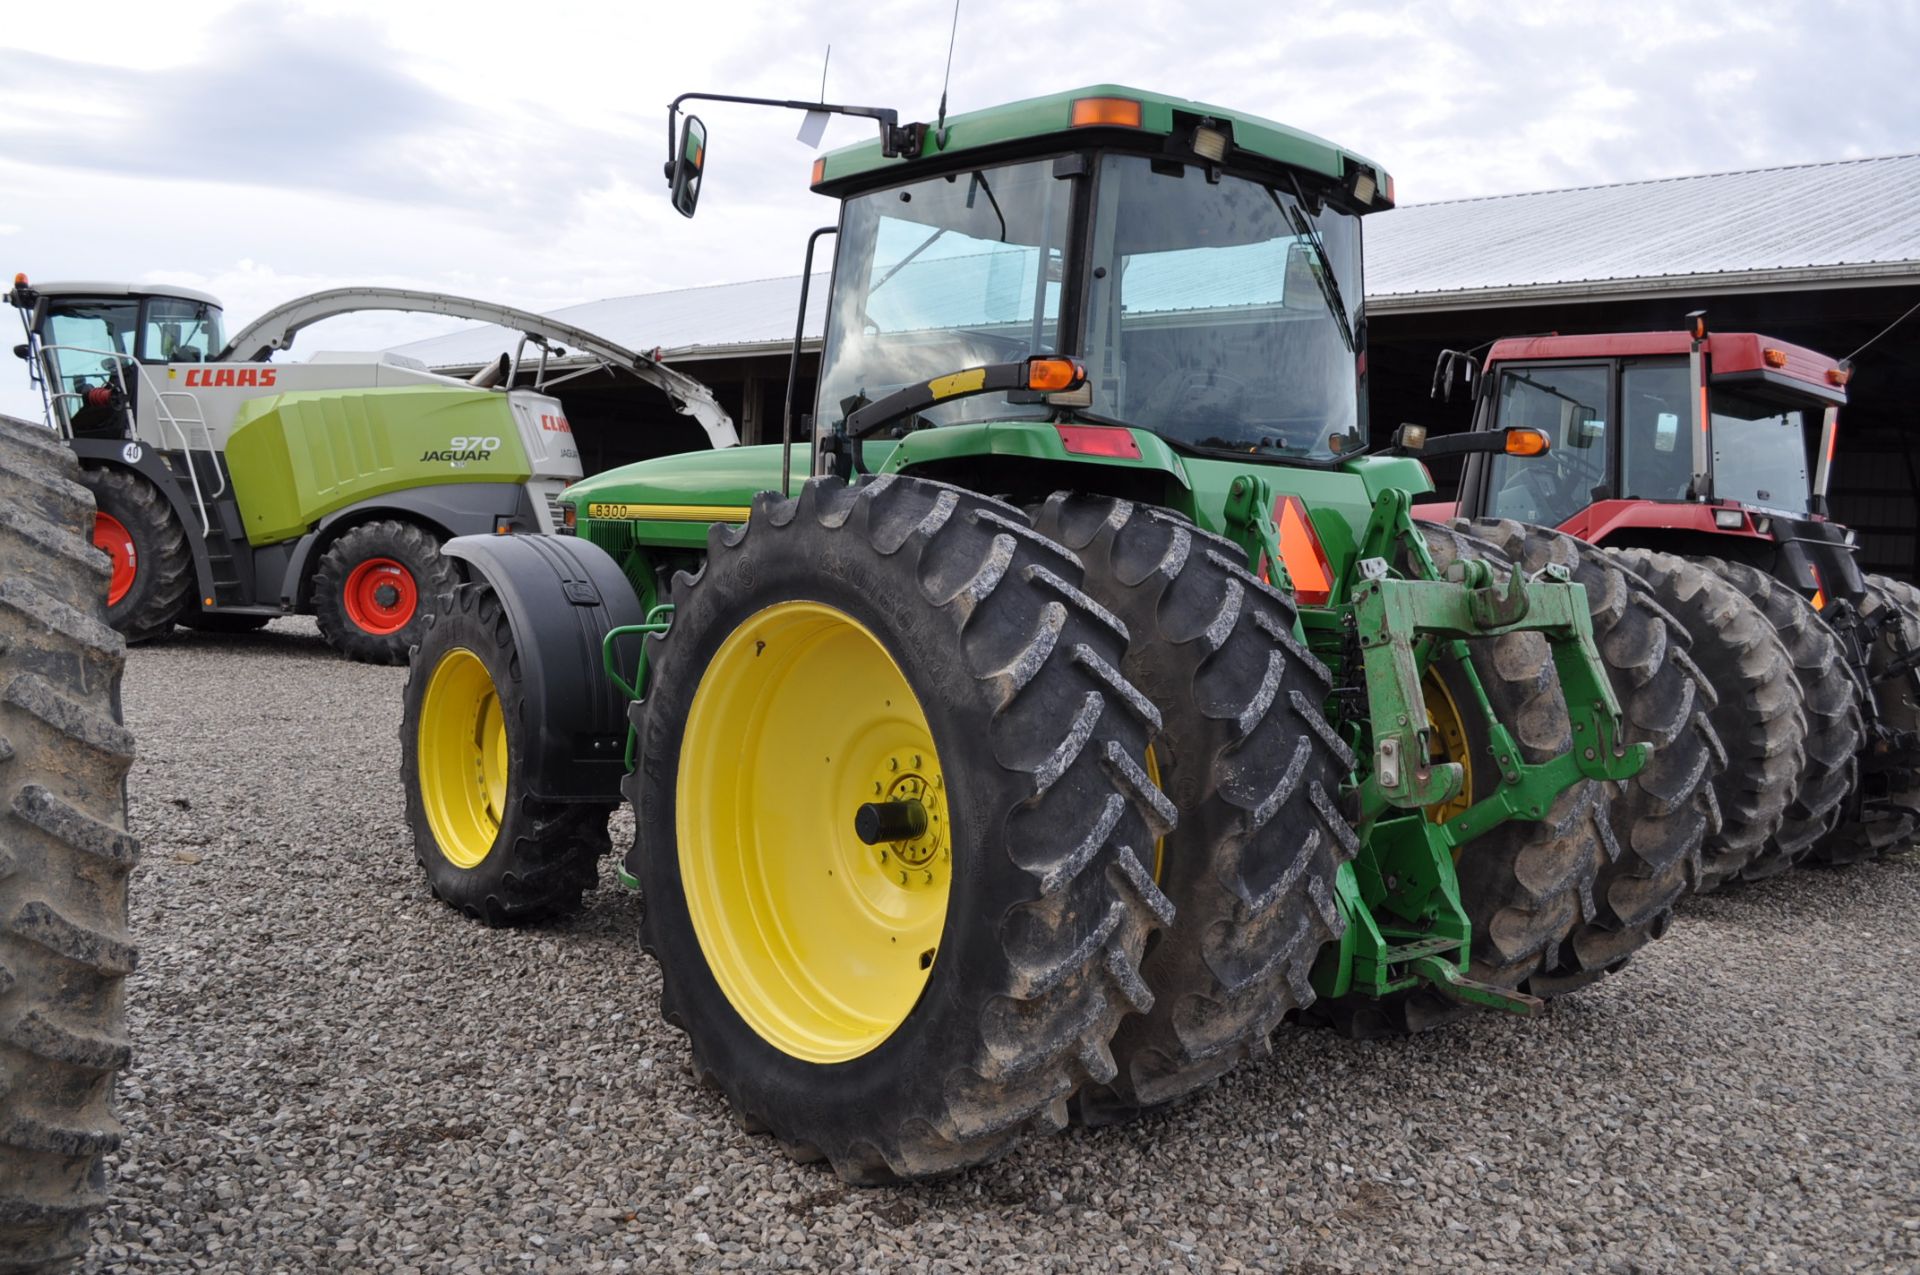 John Deere 8300 tractor, MFWD, 480/80 R 46 duals, 380/85 R 34 front, fenders, front wts, 4 hyd - Image 2 of 21